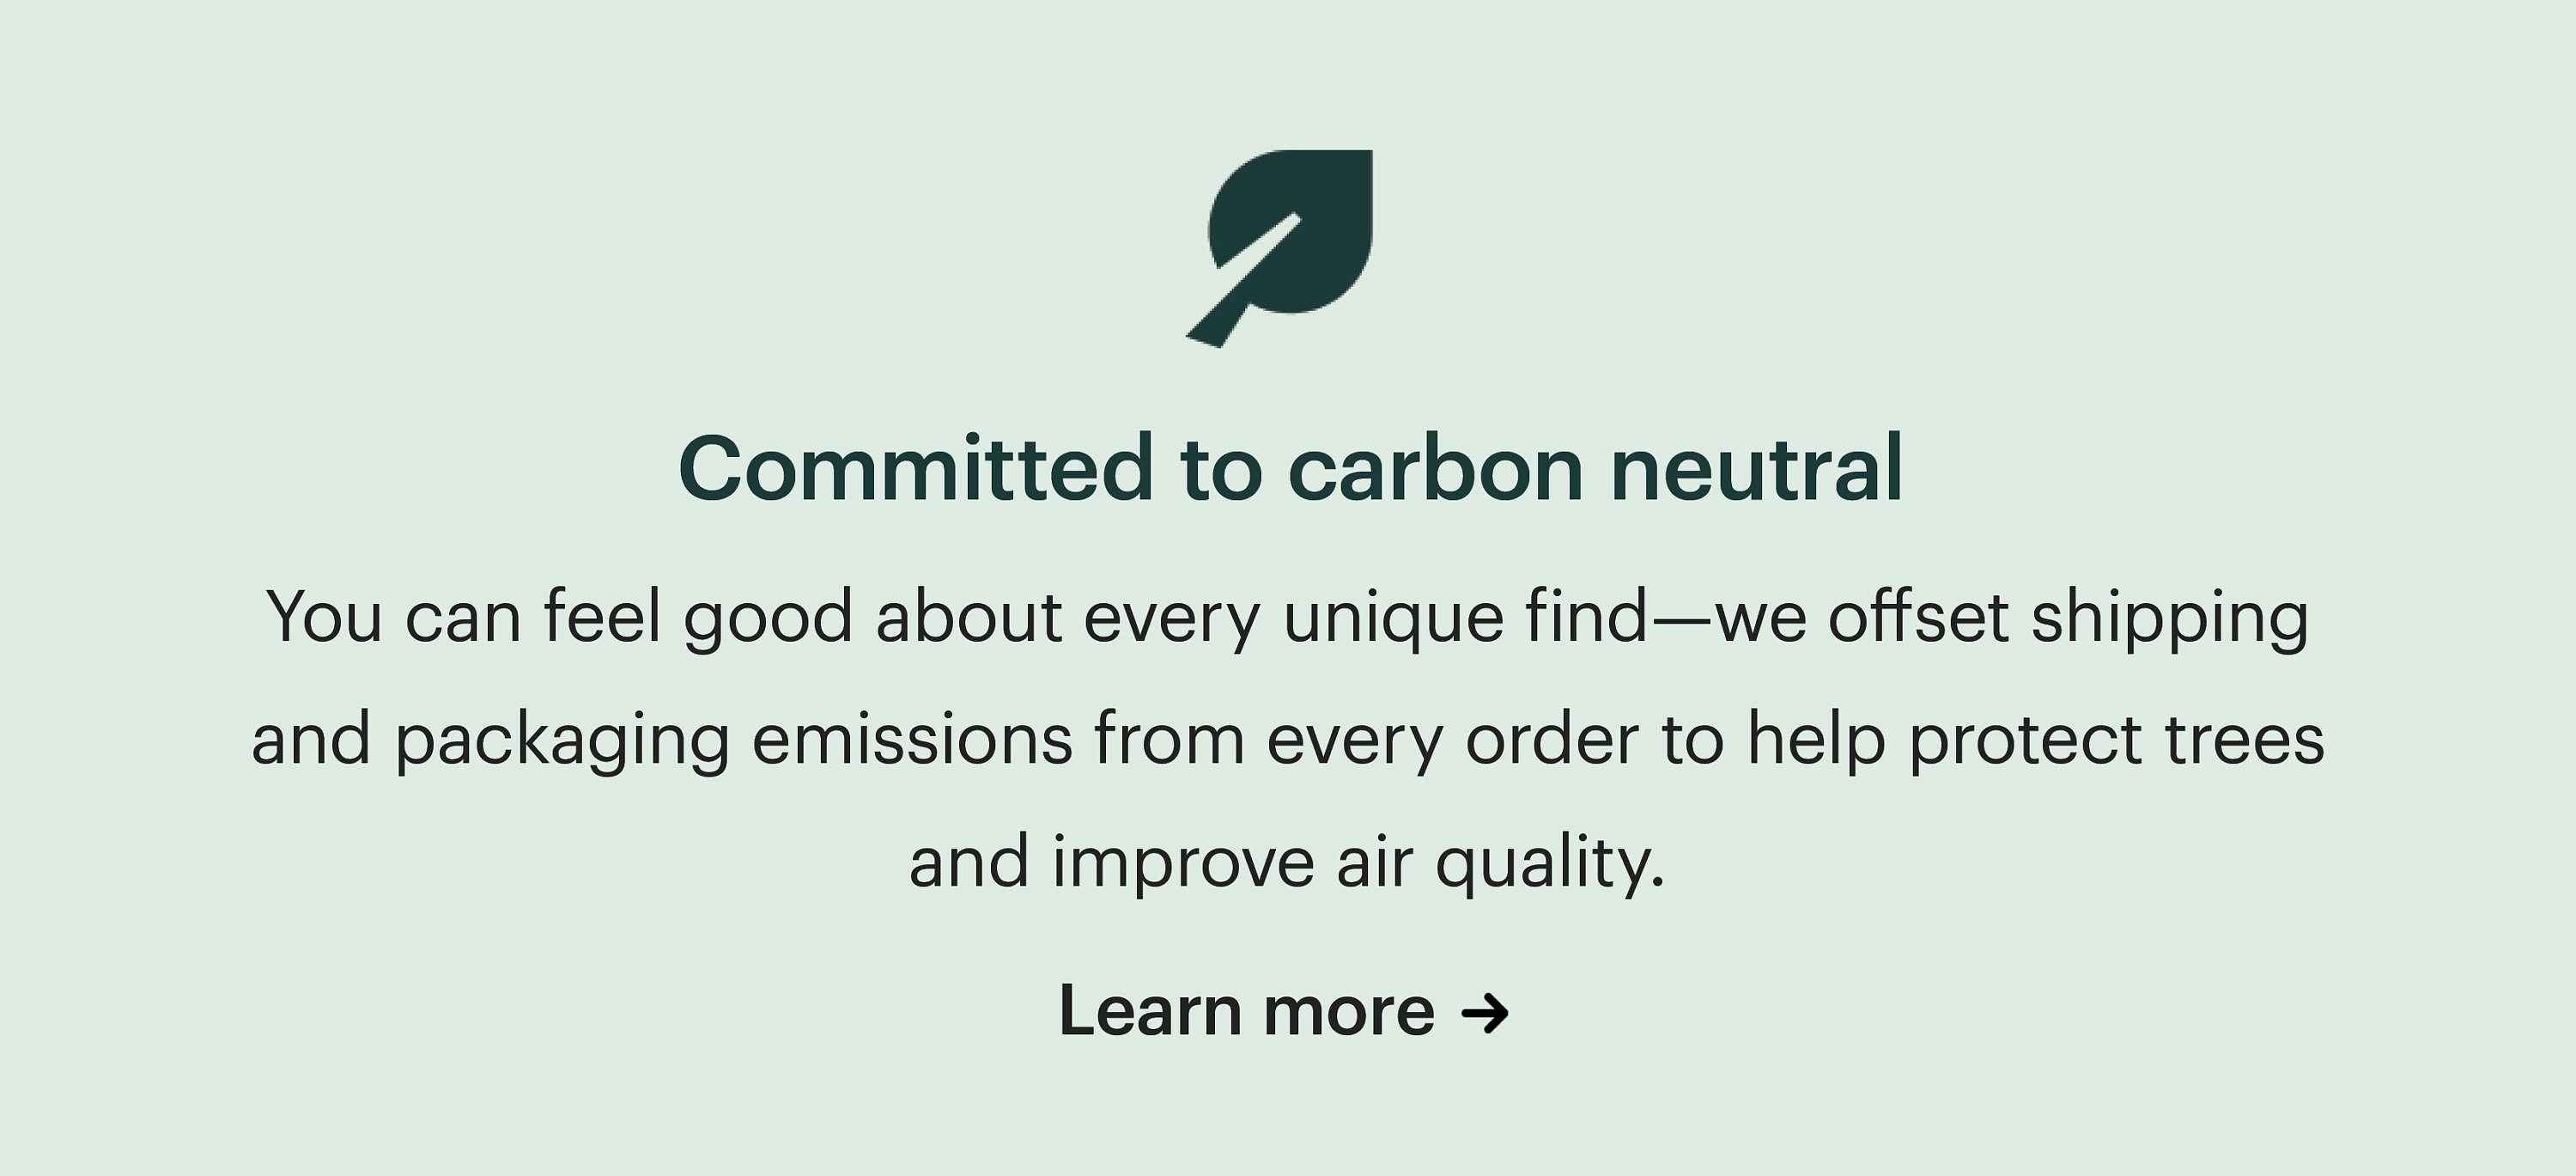 Committed to carbon neutral